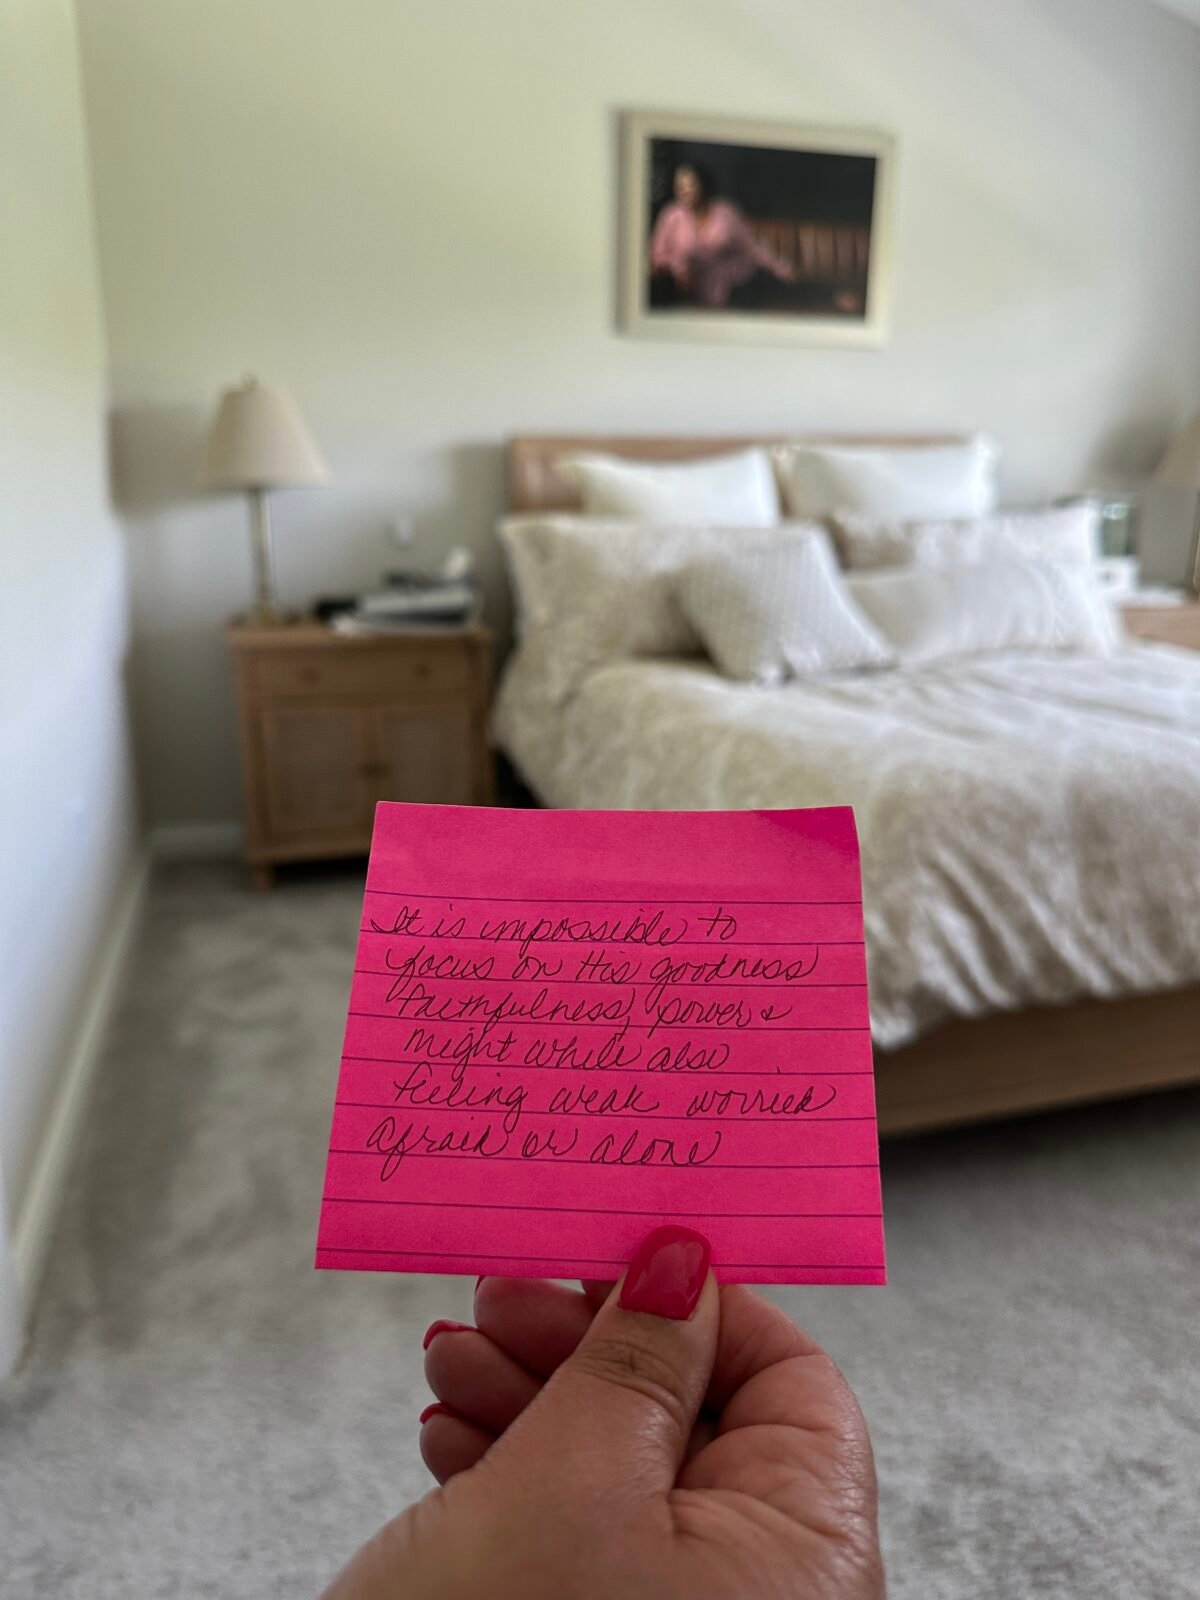 note in front of bed with picture of Regina on the wall. The pink note says, "It is impossible to focus on the goodness, faithfulness, power and might while also feeling weak, worried, afraid  or alone.